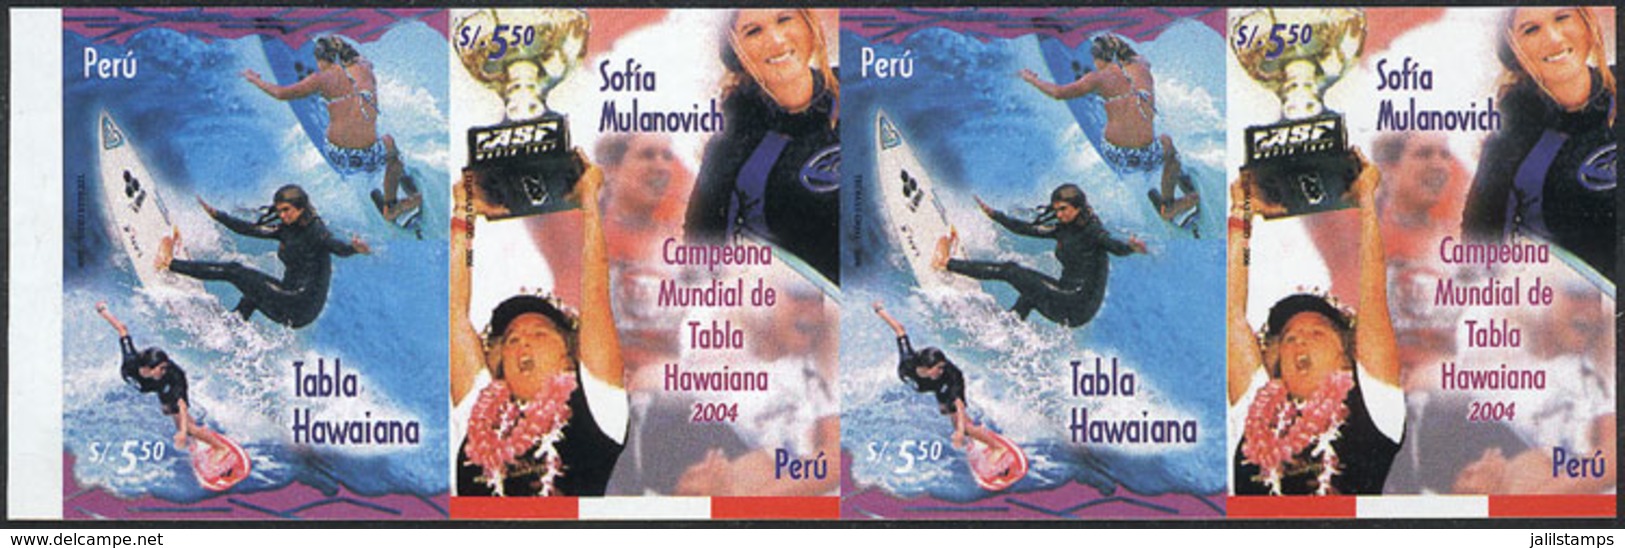 PERU: Sc.1524, 2006 Sport (surfing), IMPERFORATE STRIP Consisting Of 2 Sets, Excellent Quality, Rare! - Perù